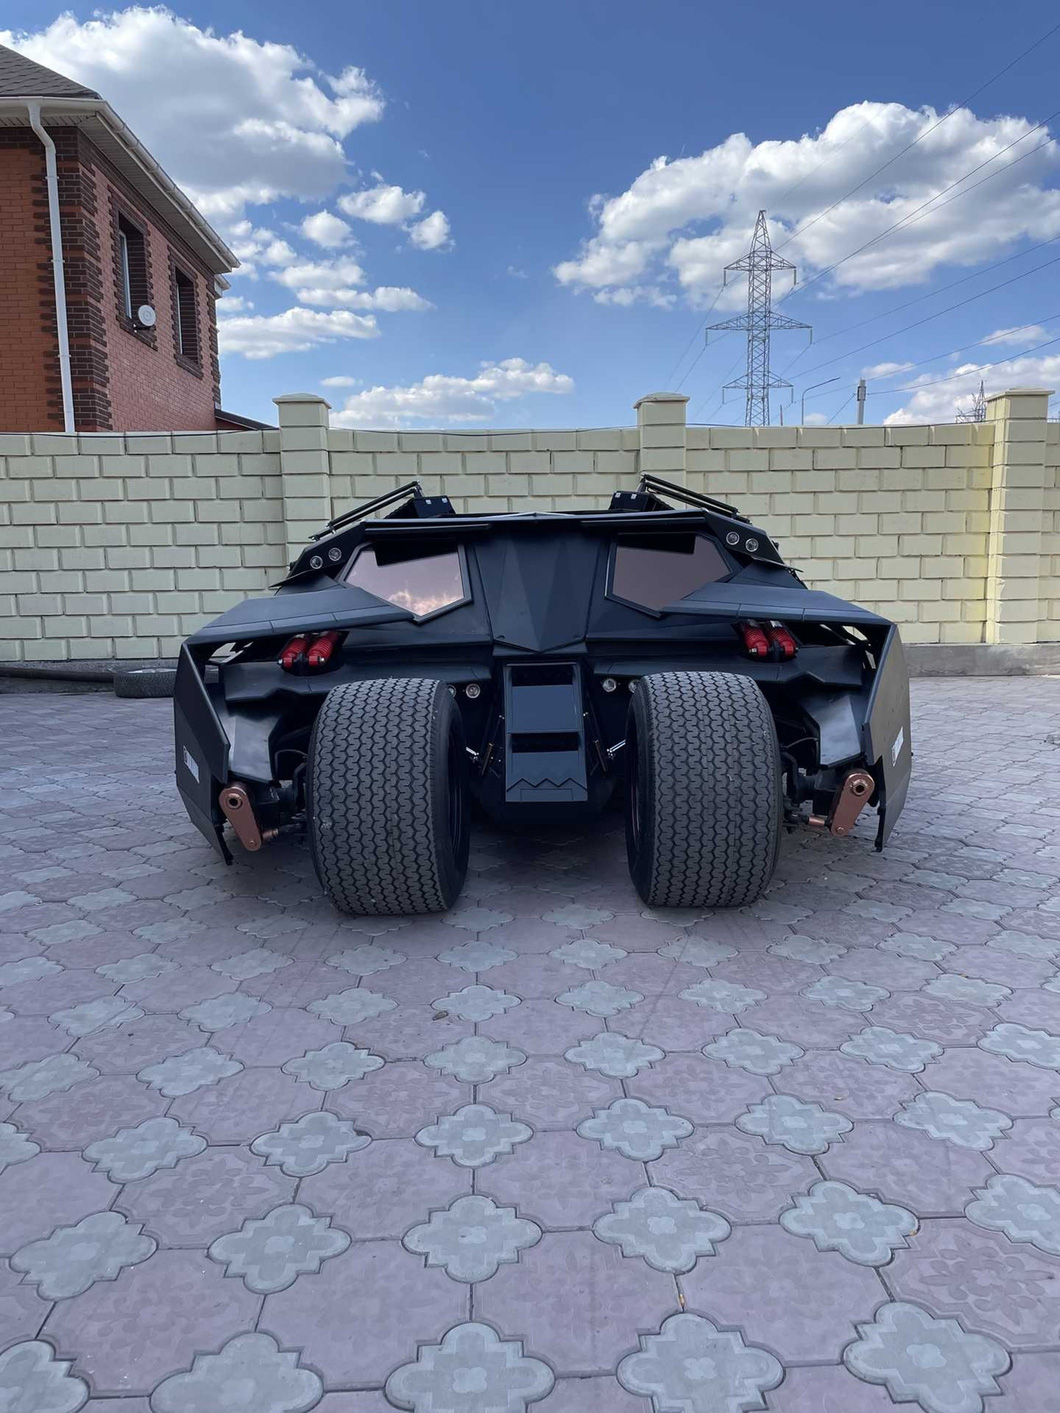 Another difference that proves jb_kanal's Batmobile isn't just a C-shaped car is the 300-horsepower V8 engine.  With this engine, when there is enough space, the car can take off like flying close to the spirit of the icon in the movie - Photo: jb_kanal